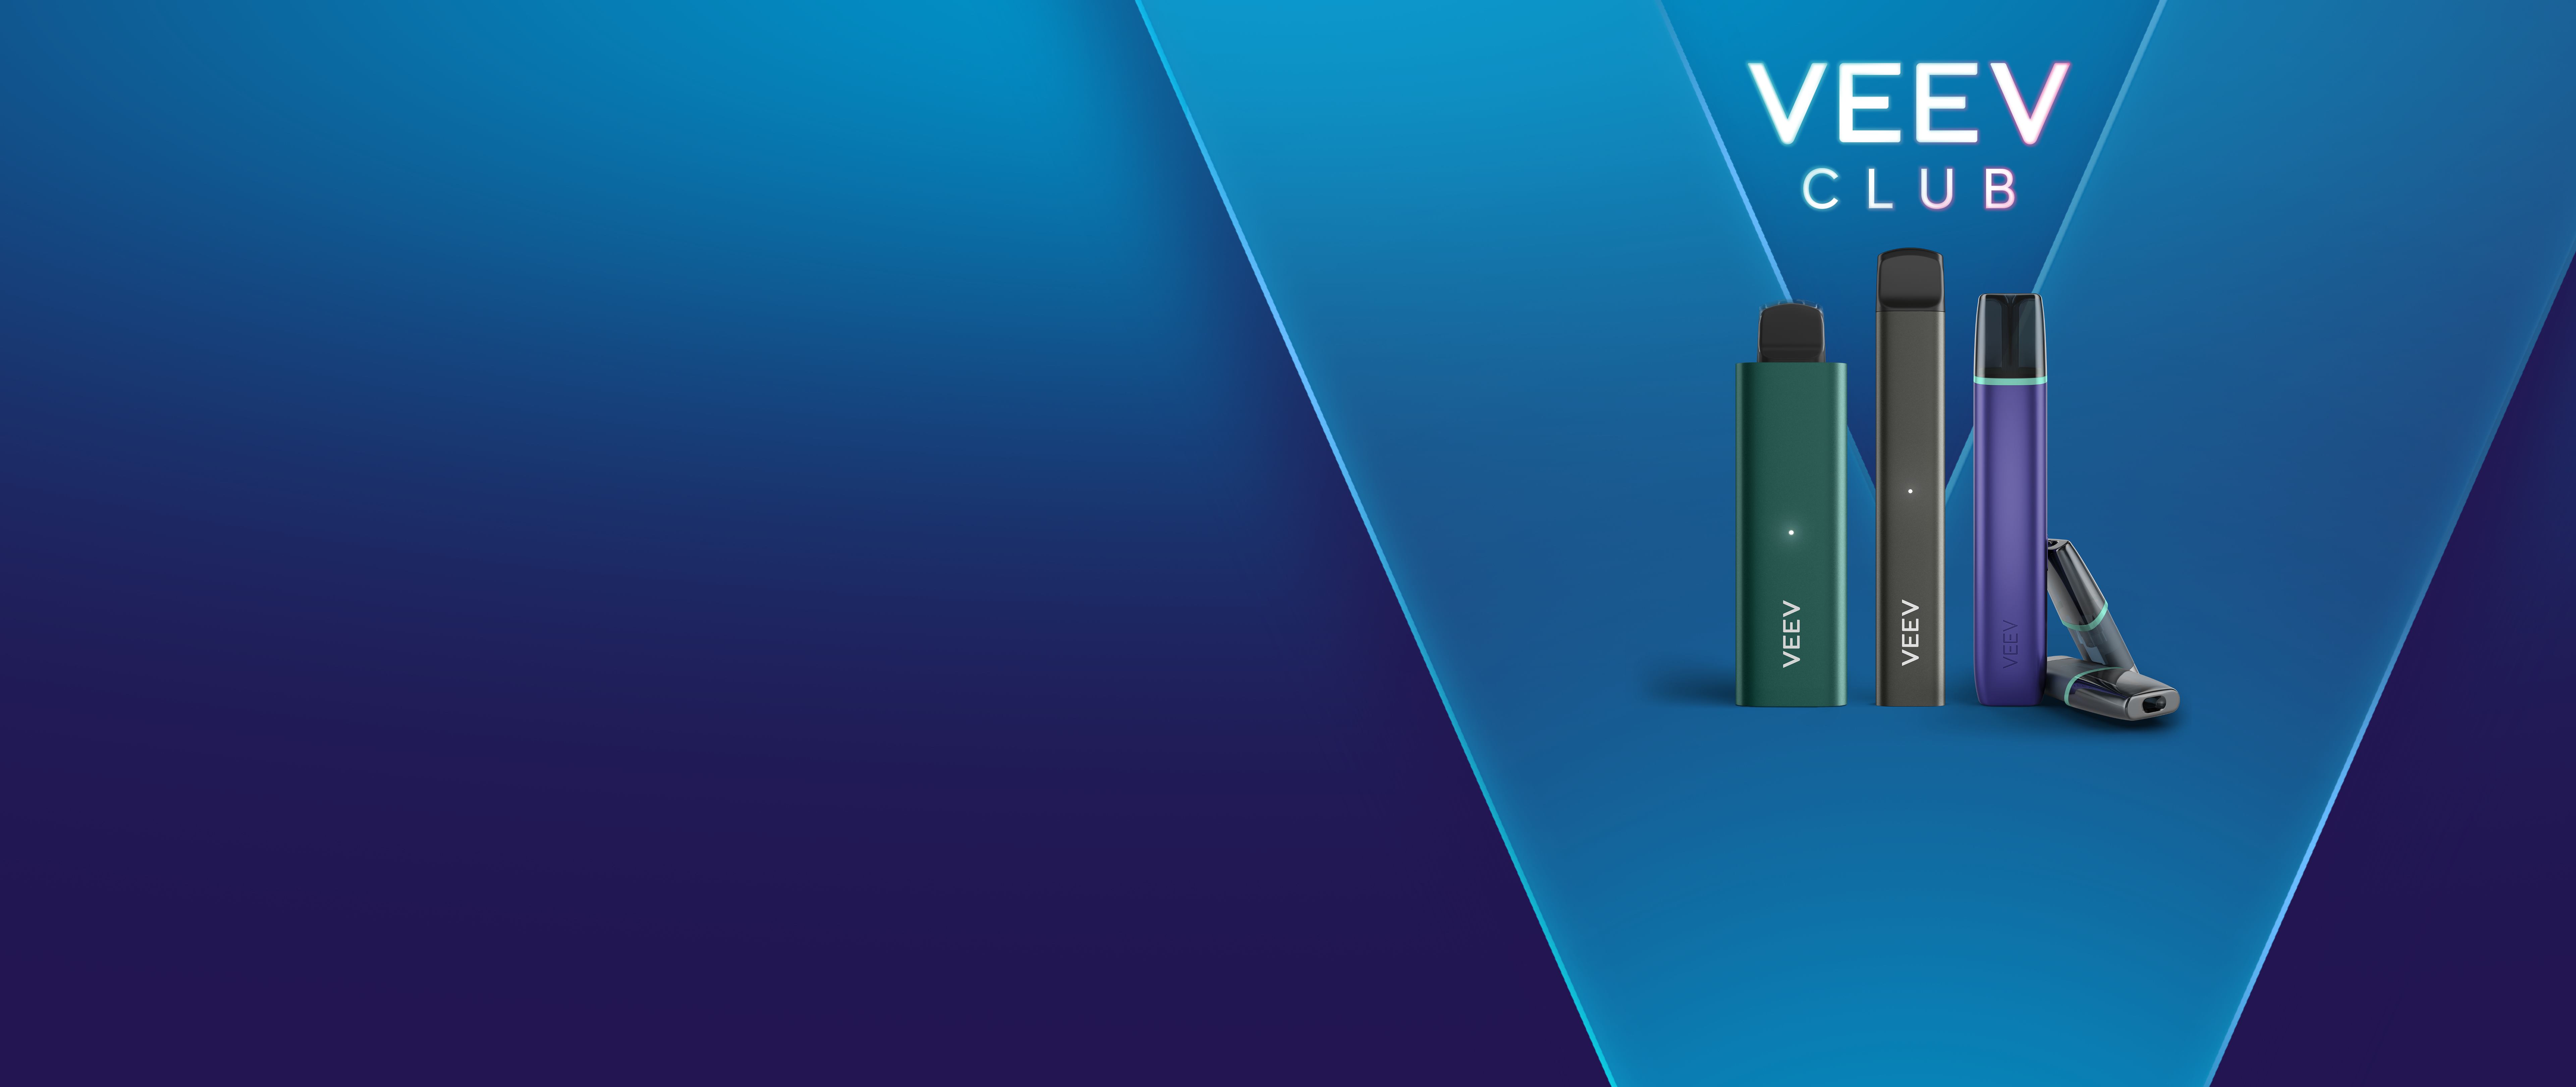 A 5 mL VEEV NOW disposable vape, 2 mL VEEV NOW disposable vape and a VEEV ONE pod vape device.